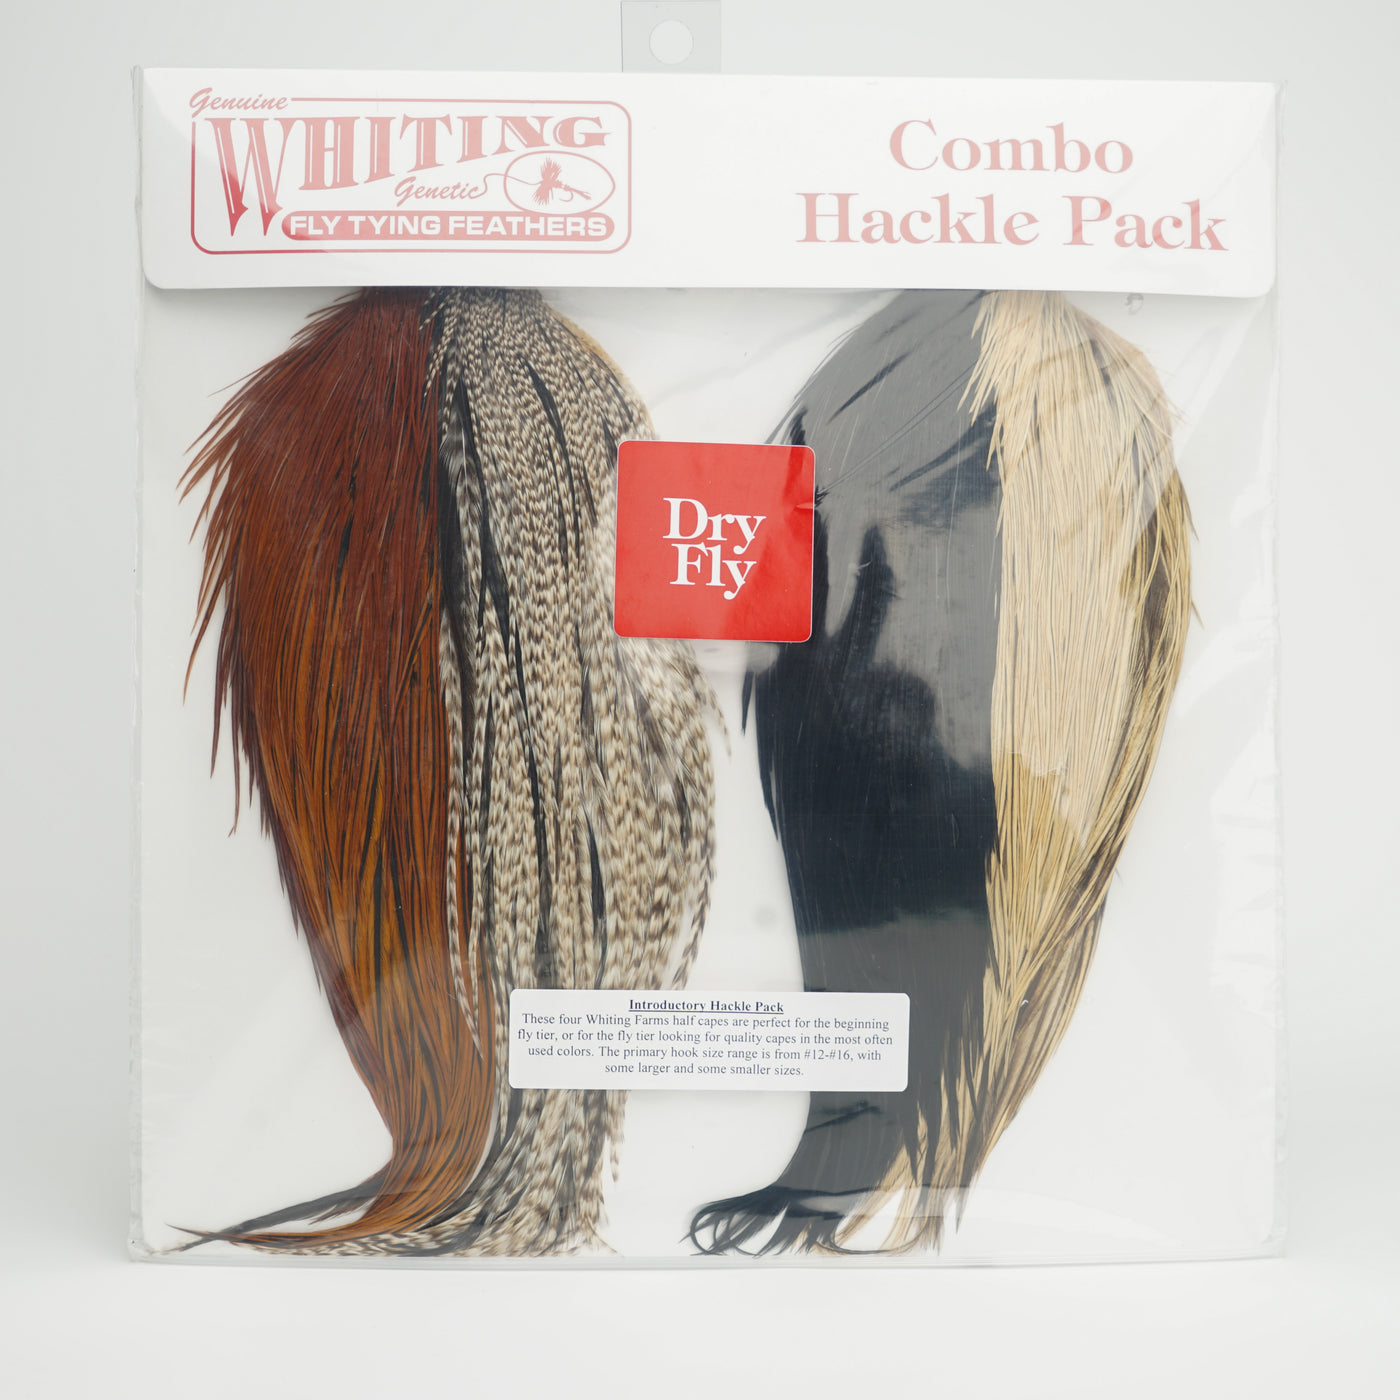 Whiting Farms Combo Hackle Pack - Four 1/2 Capes